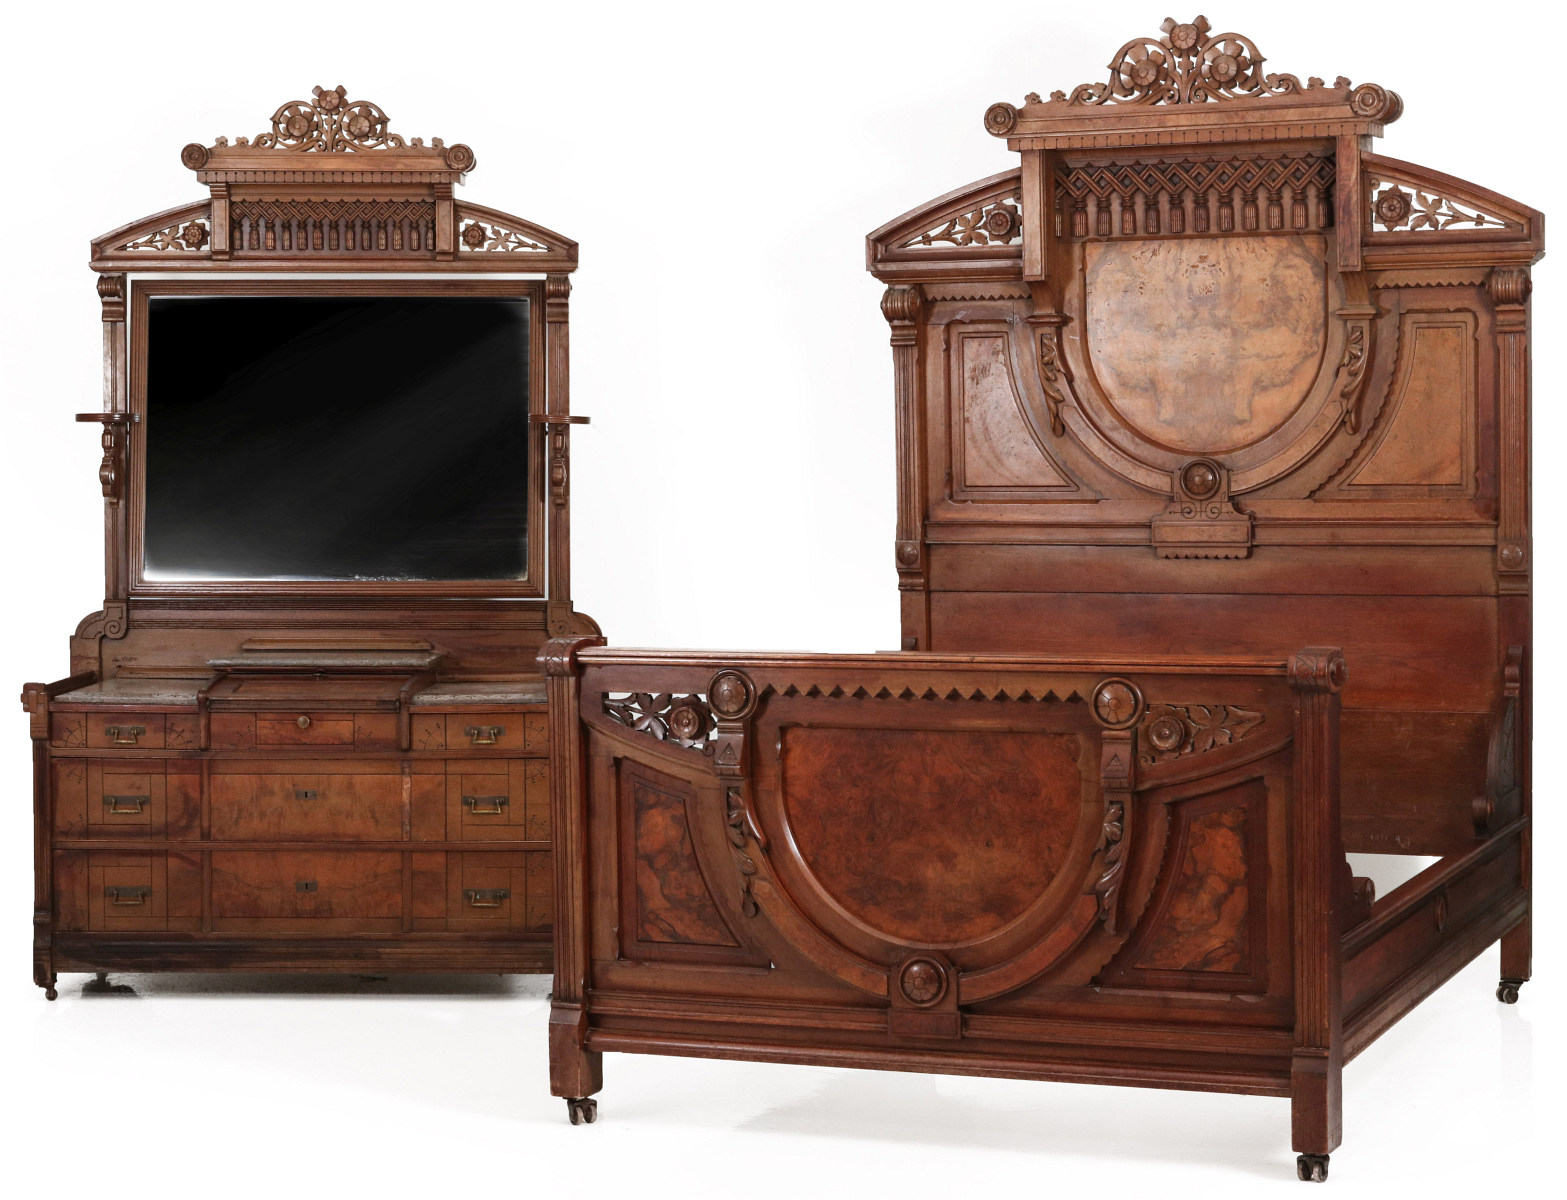 A VERY UNUSUAL 19TH CENT AMERICAN BEDROOM SET